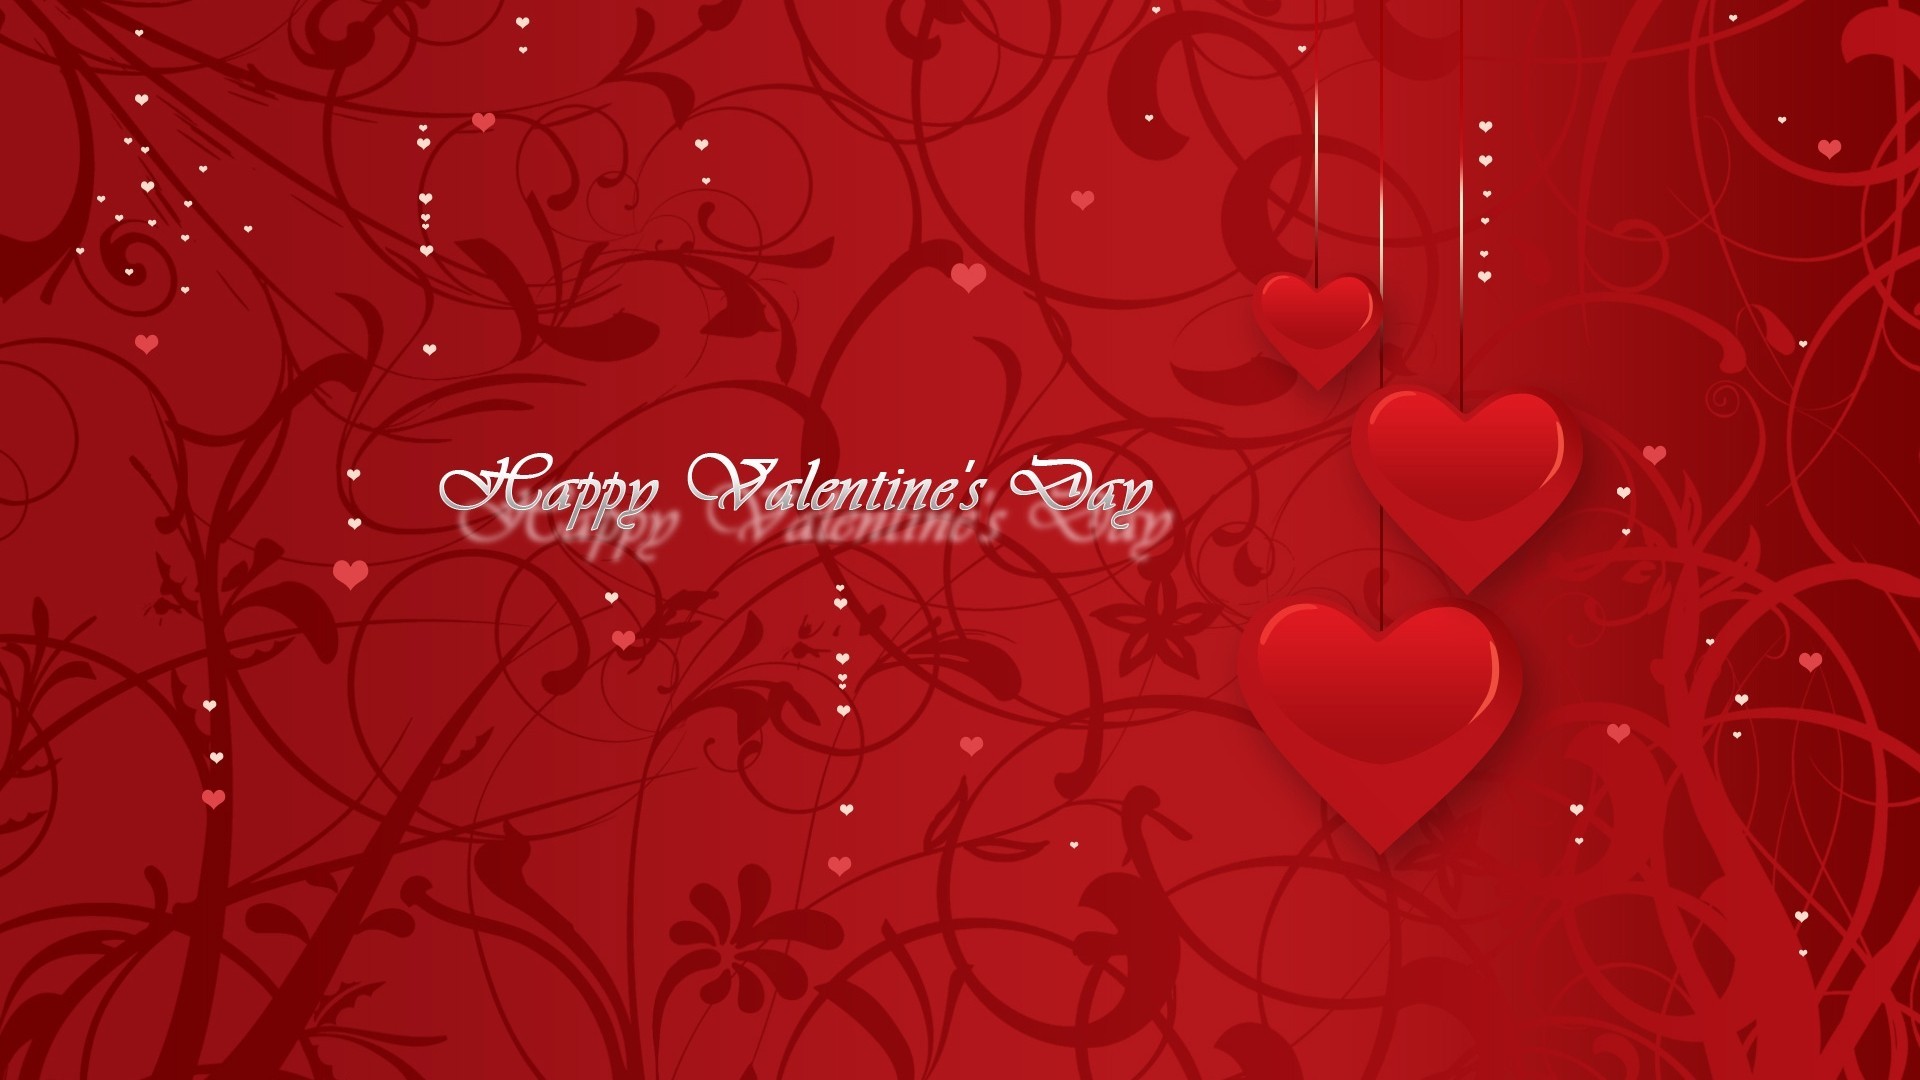 Happy Valentines Day Images HD Wallpaper